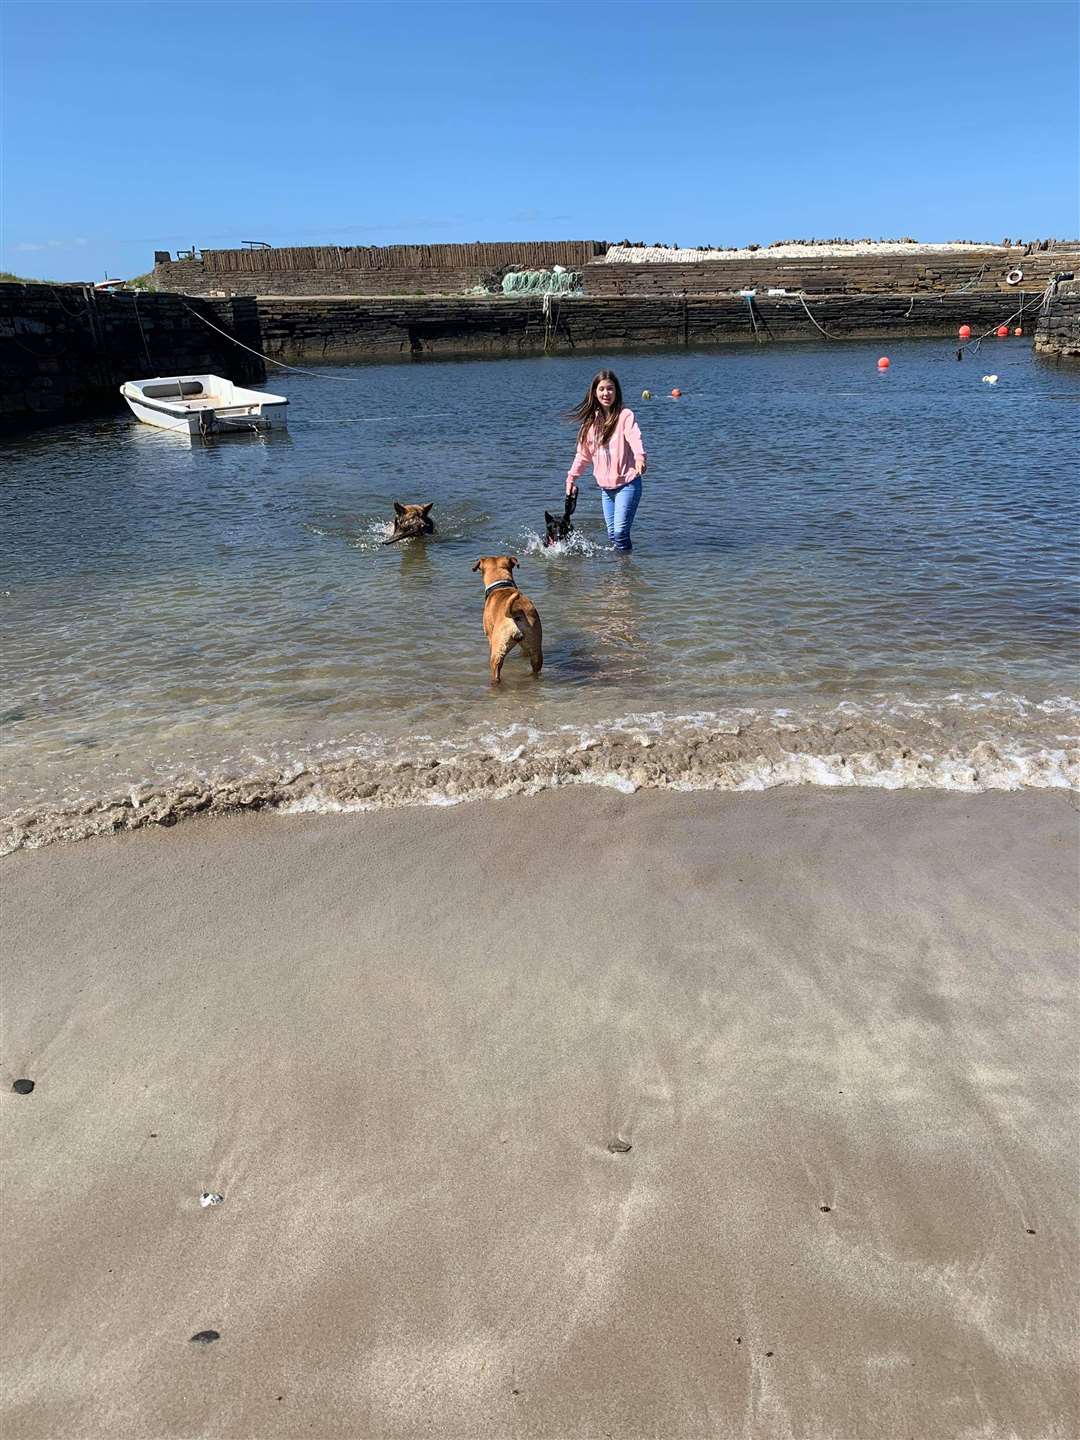 Uki with Lynn's 12-year-old daughter Katy in the water at the harbour in Castletown. This was her first time in the water and she was being taught recall on the long lead. Also in the picture are Odin and a terrier cross called Neep at the edge of the water.